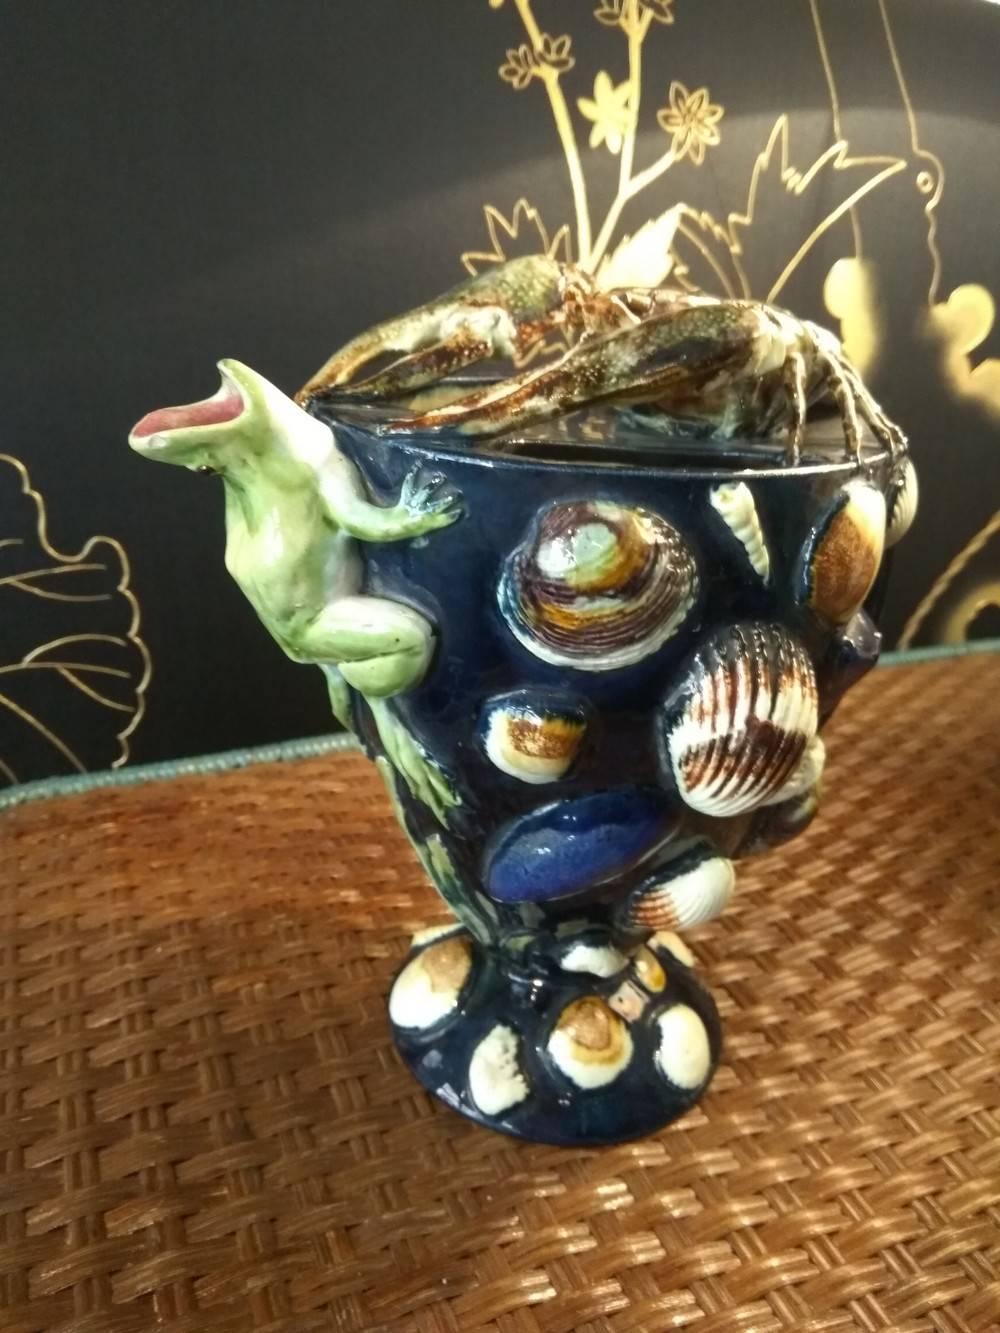 This ewer with shellfishes was made by the famous ceramist Thomas Sergent from the second half of the 19th century. Homas Sergent found his inspiration in the rustic ewer attributed to Bernard Palissy, currently on display at the Louvre Museum. This